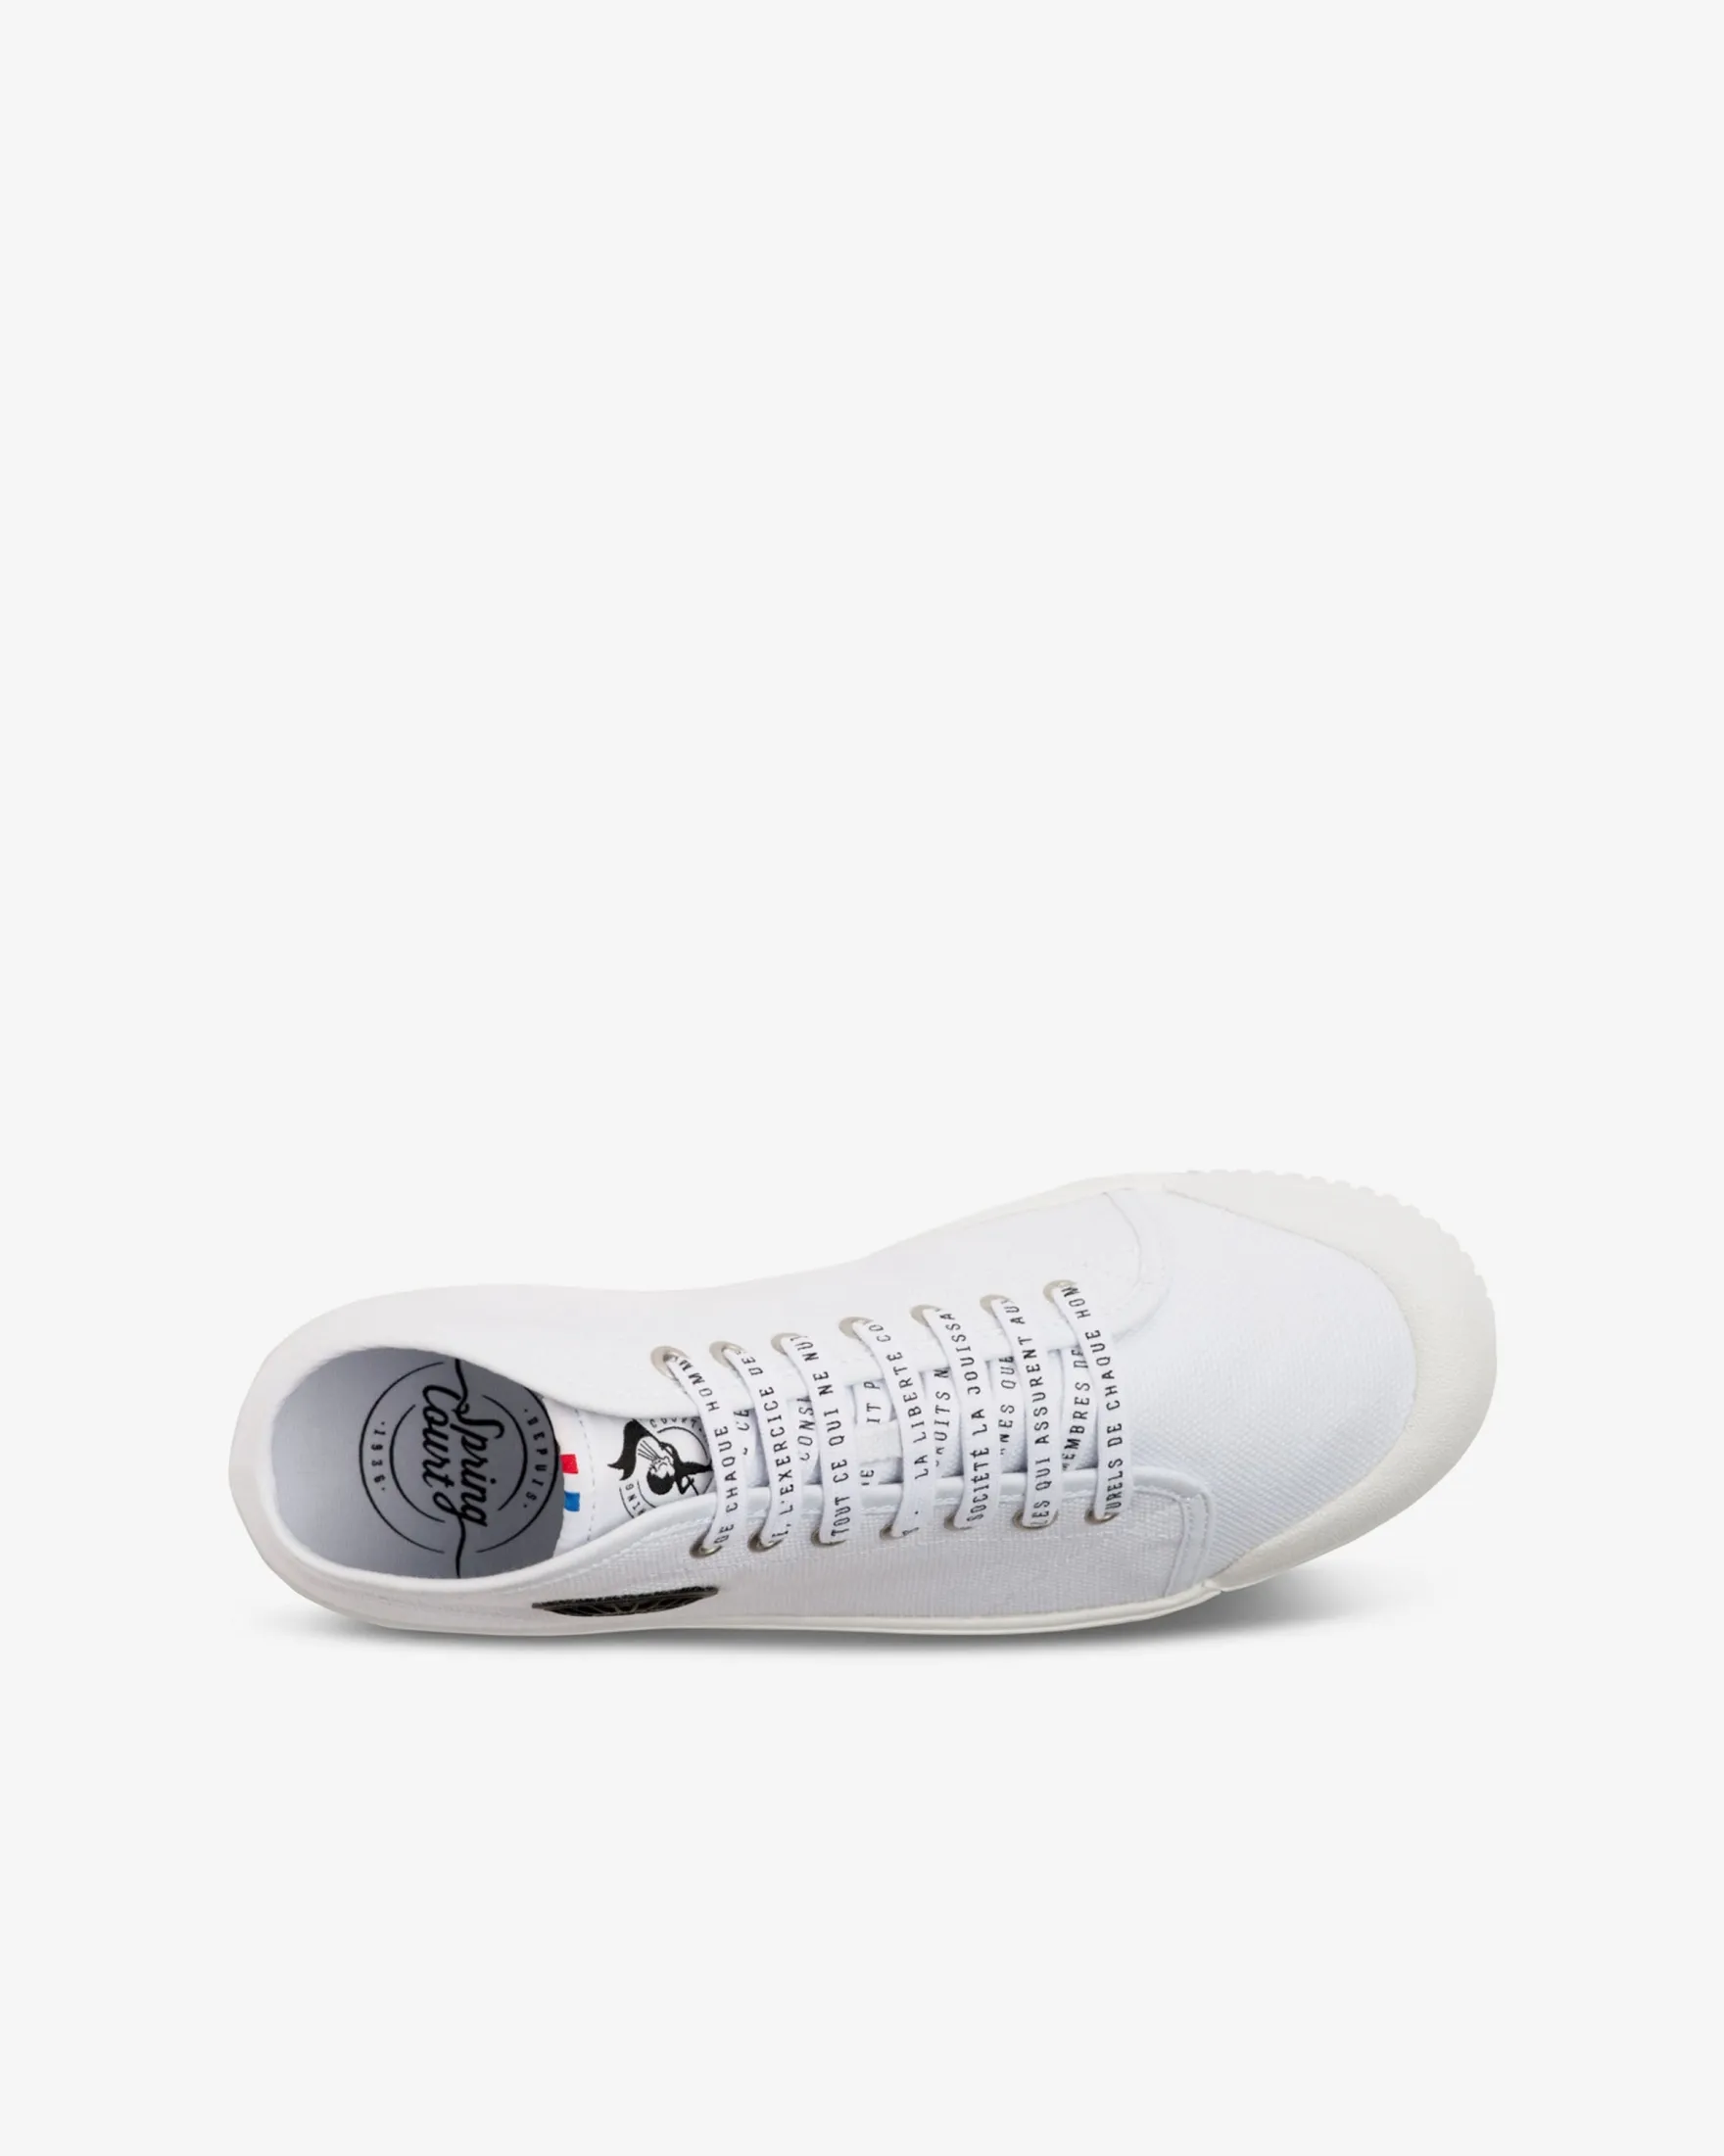 Capsule high top white canvas trainer